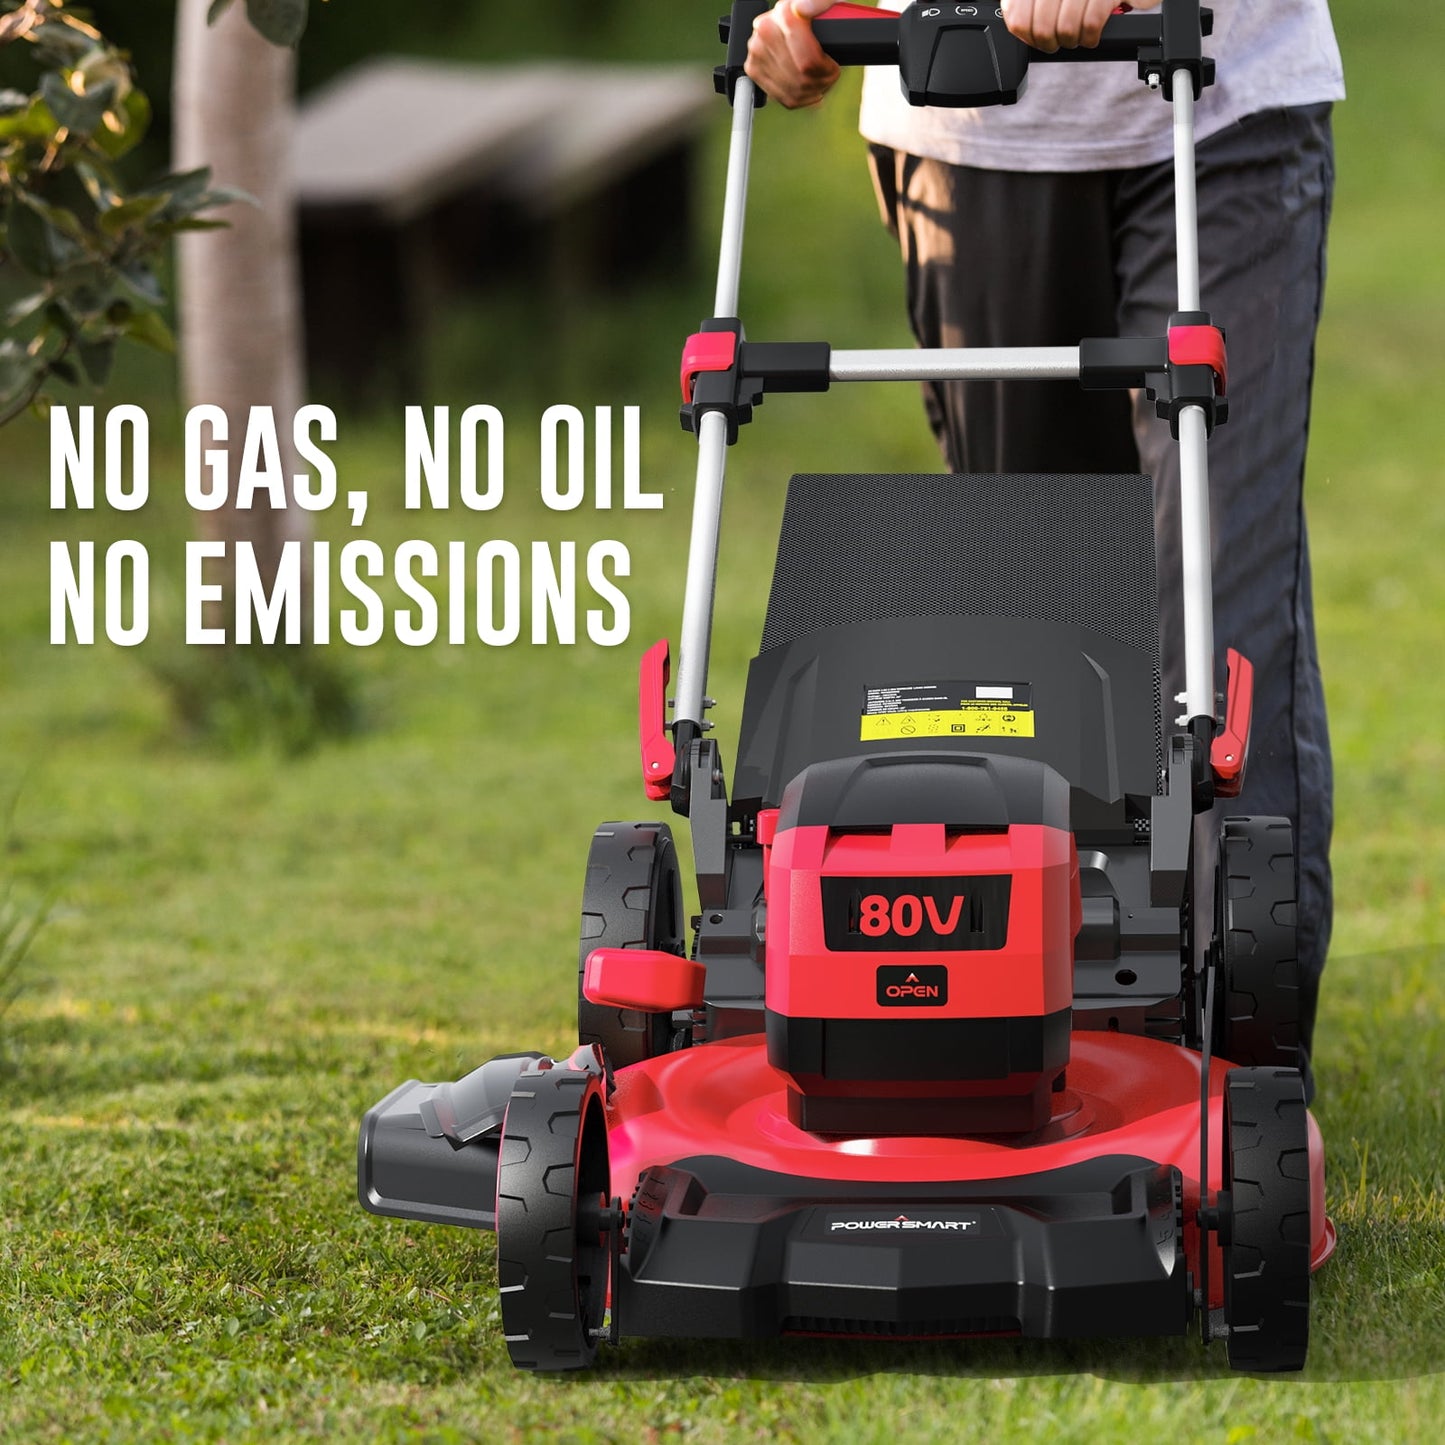 PowerSmart 80V 22-inch Self-Propelled Cordless Lawn Mower with 6.0Ah Battery and Charger